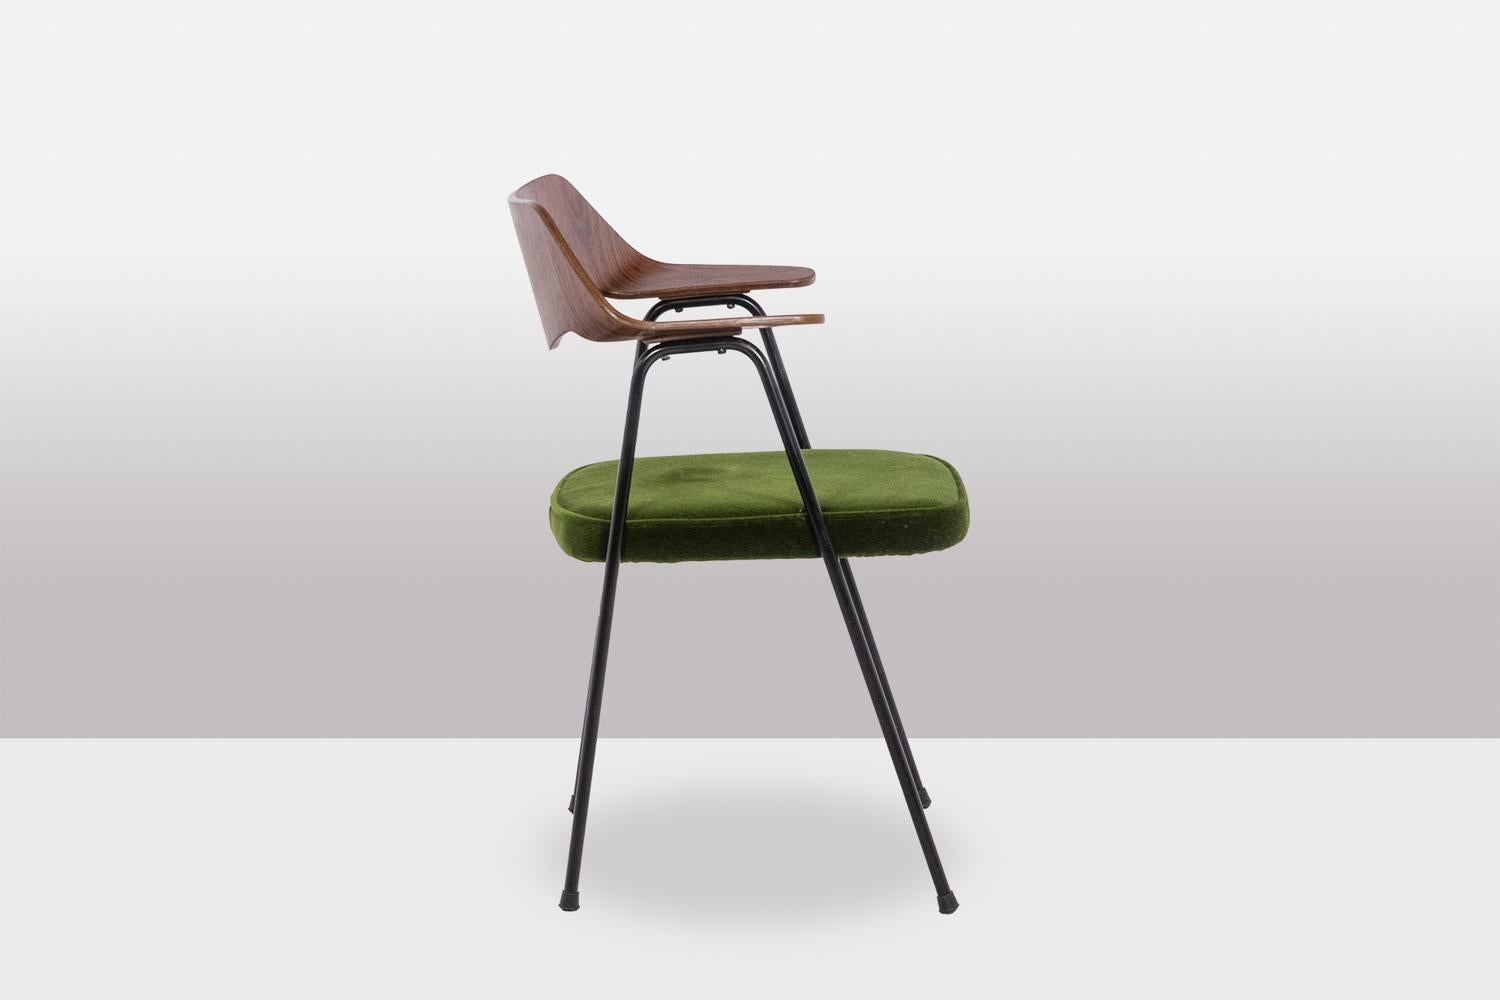 Robin Day for Airborne.

“675” model armchair resting on a black lacquered tubular metal base in the shape of an inverted V. High back in molded plywood curved to obtain a curved back extending over the legs to form two curved armrests. Green velvet